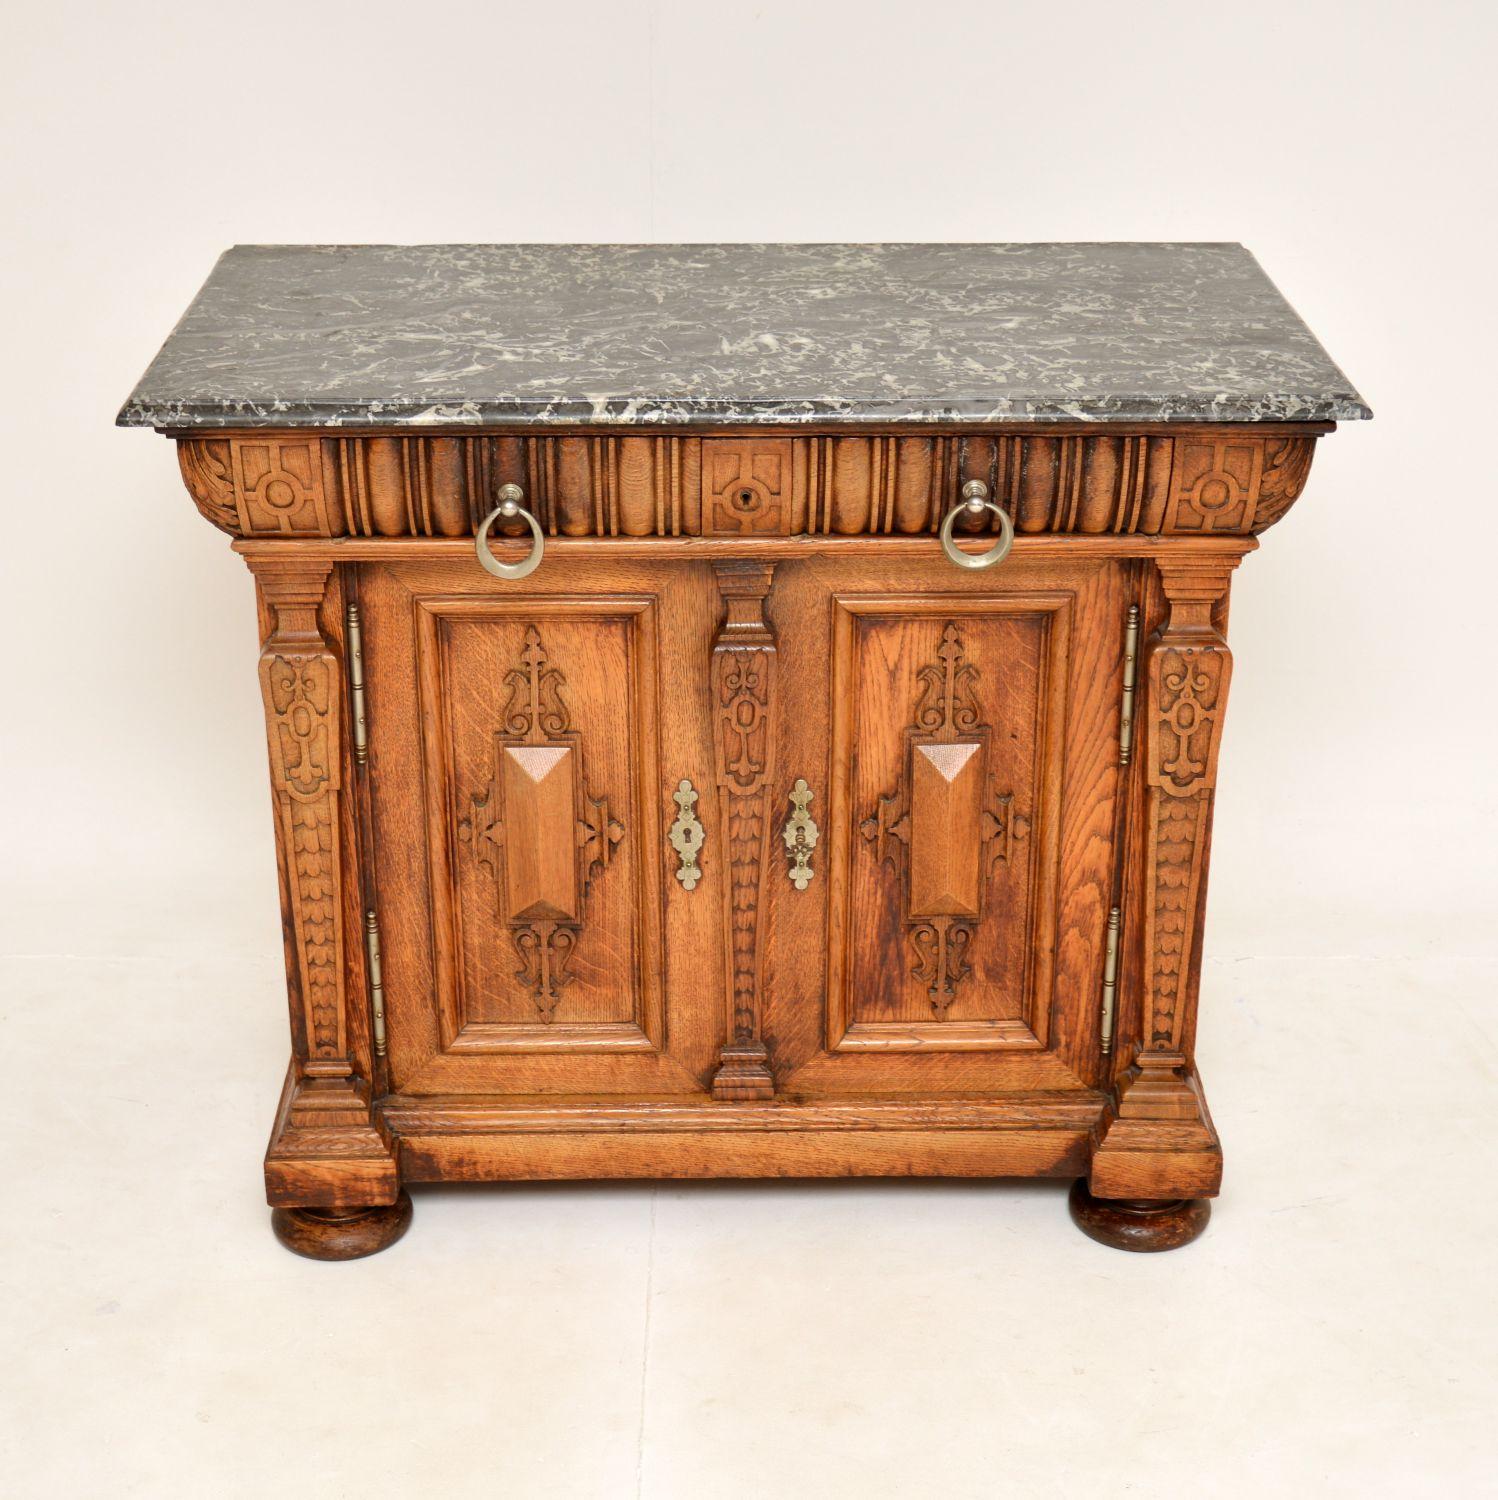 An amazing original antique Arts & Crafts period marble top carved solid oak cabinet. This was made in England, it dates from around the 1880-1890’s.

The quality is outstanding, with beautiful crisp carving, and very finely made brass hardware.